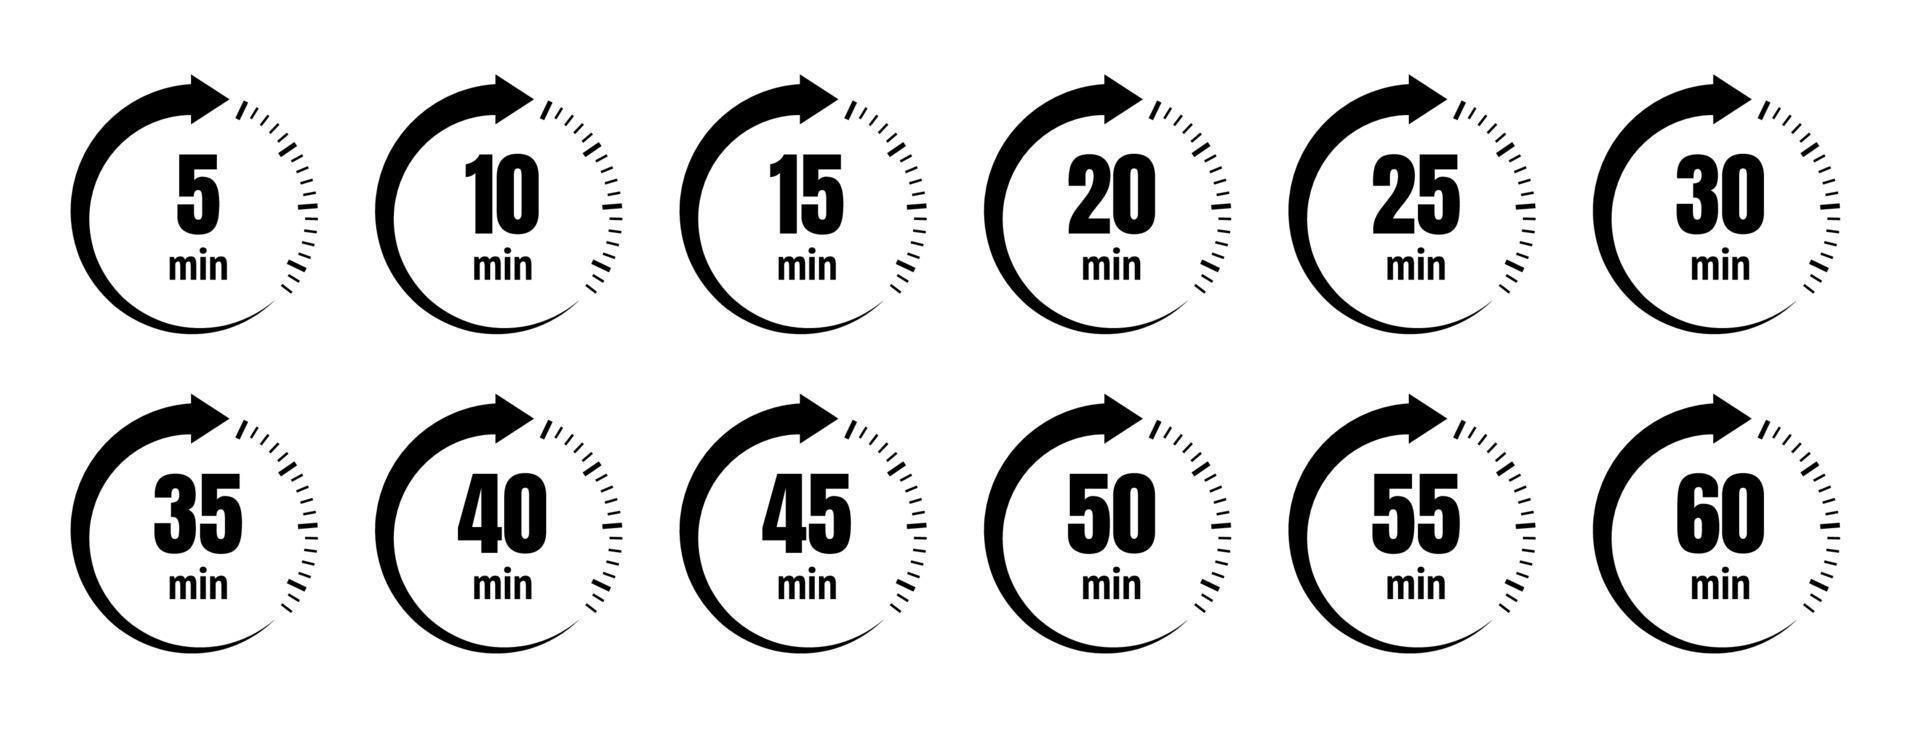 Timer icon collection. Set of timer Stopwatch icons. Countdown from 0 to 60 seconds. vector